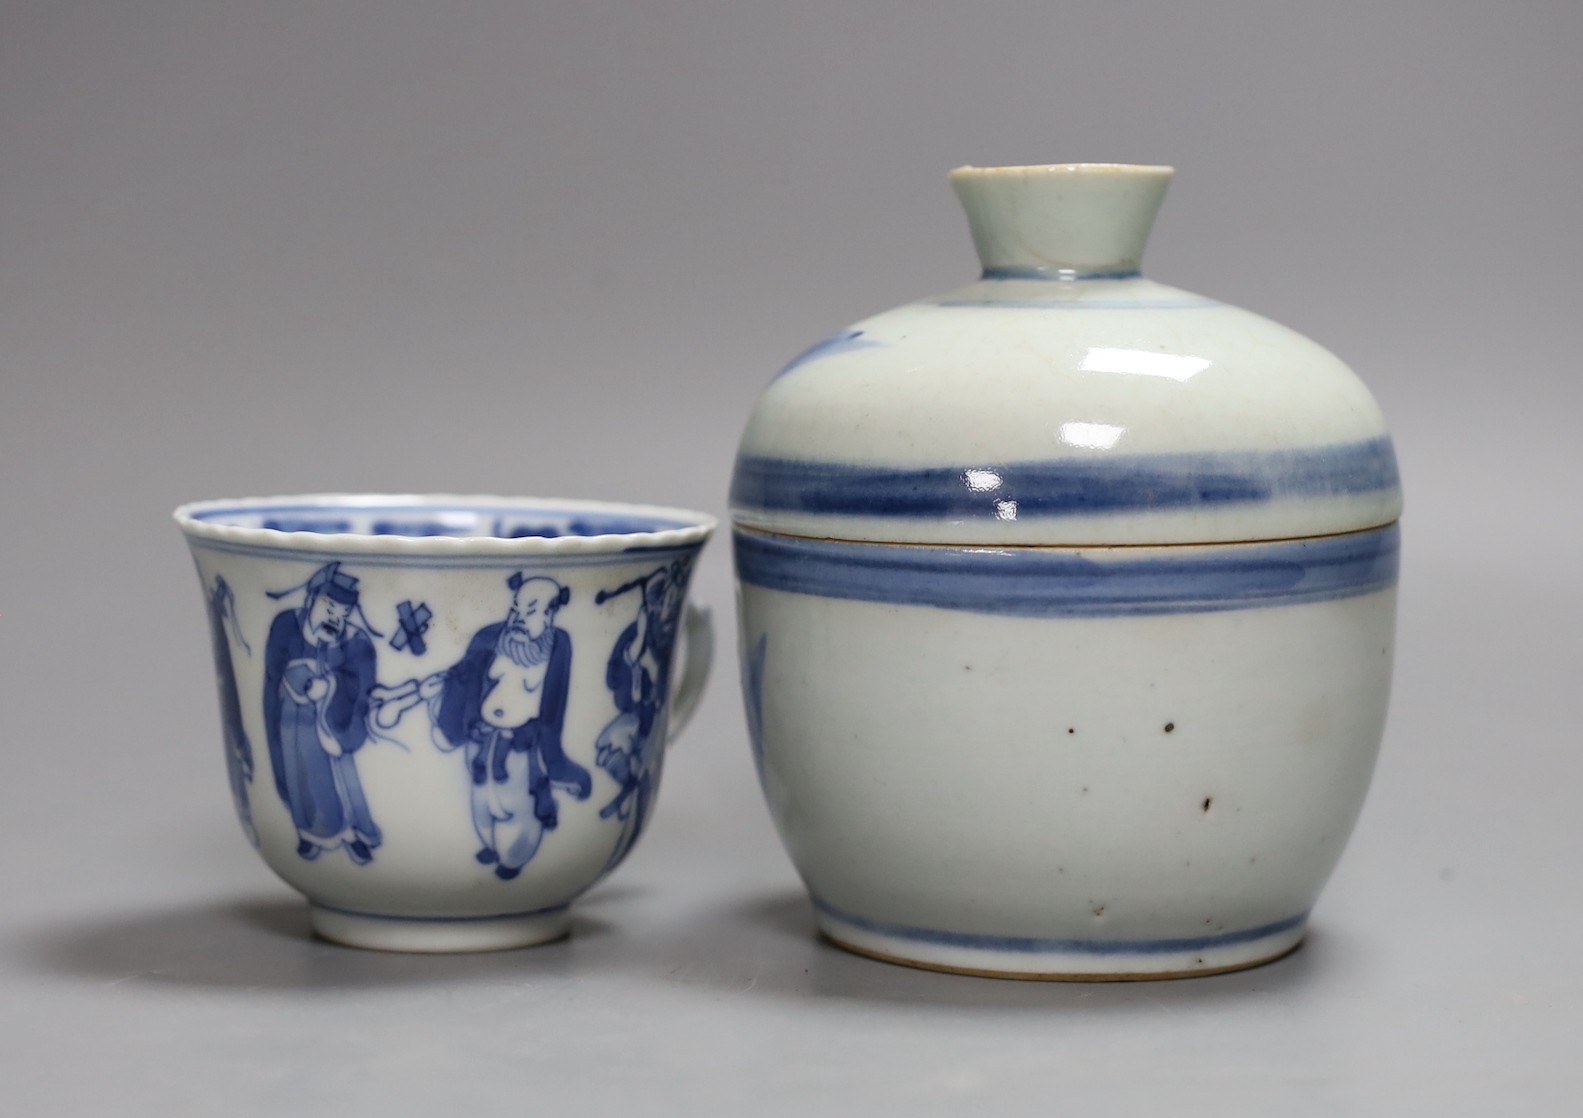 A 19th century blue and white jar with cover and a similar cup, Jar and cover 13 cms high